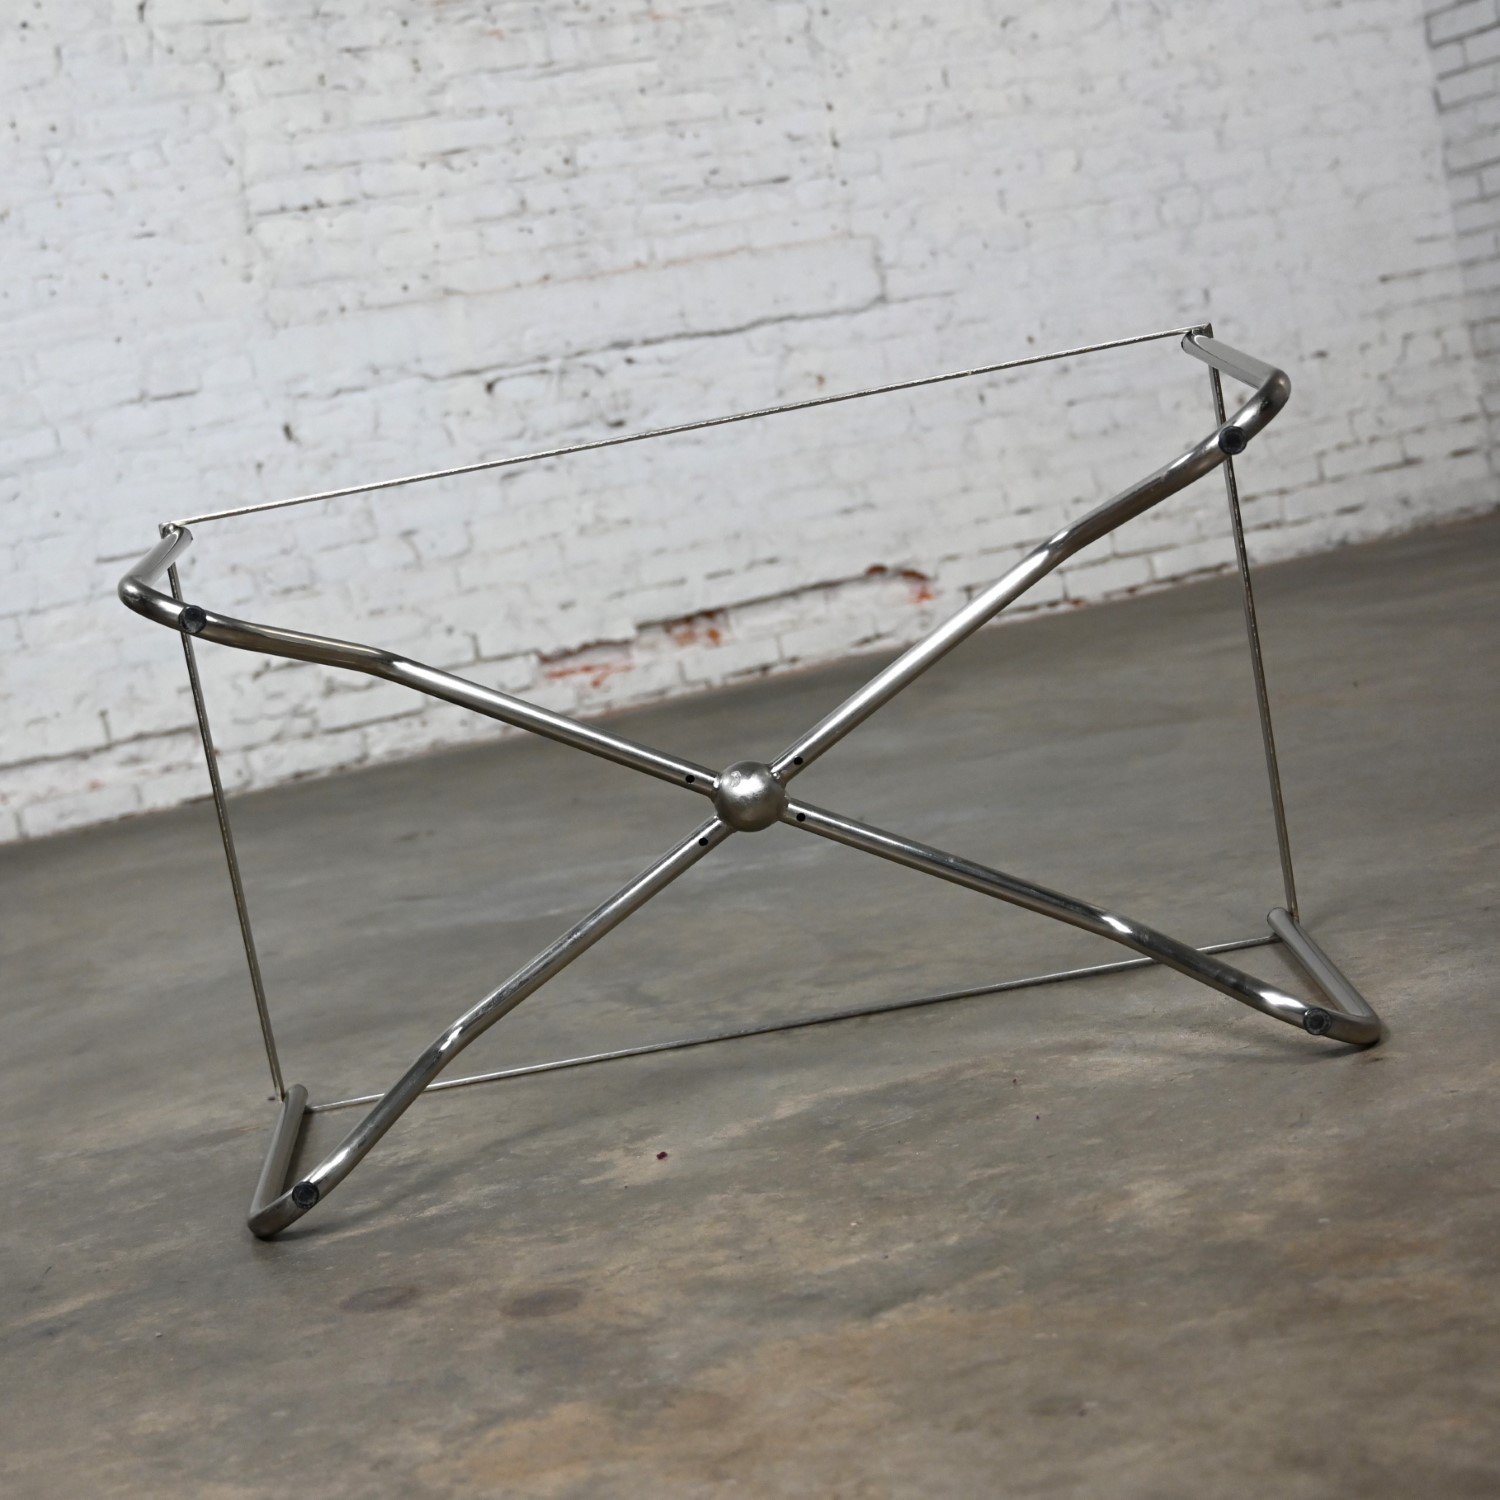 Late 20th Century Modern Brushed Steel Tube Coffee Table with Removeable Black Glass Top